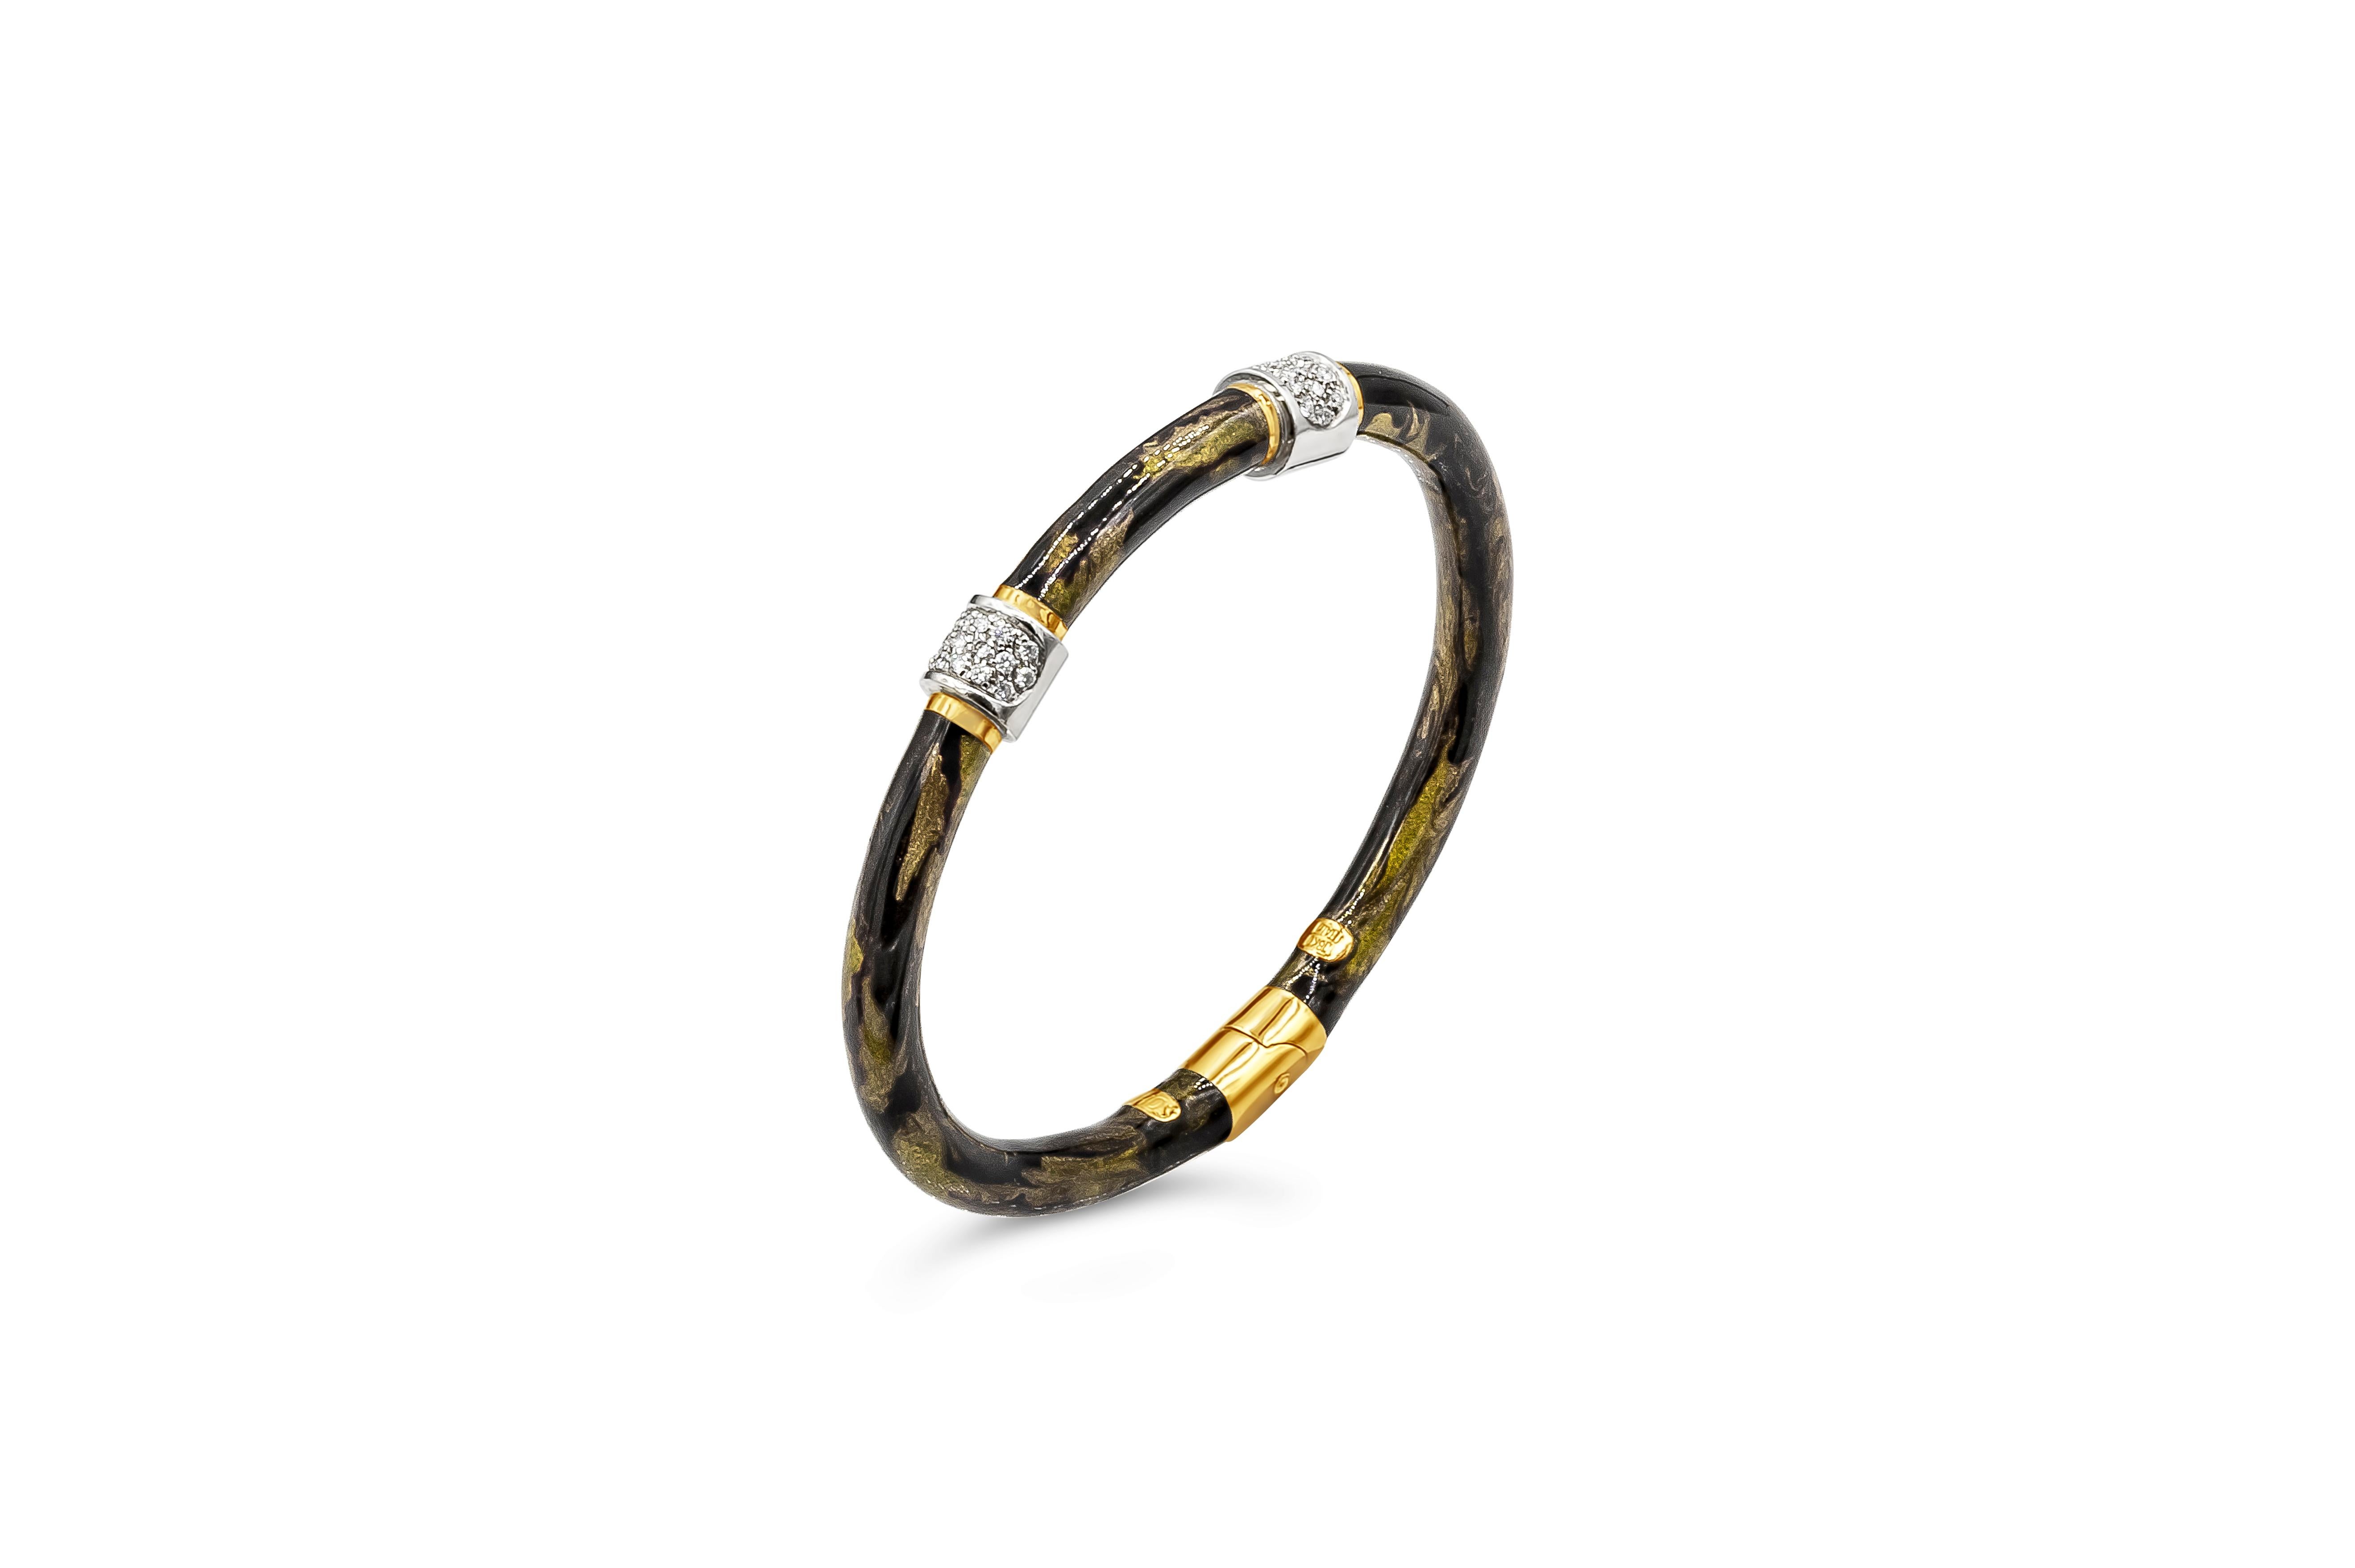 A unique bangle bracelet. This ode to tiger's eye uses a multilayered proprietary enamel finish, inlaid with Yellow Gold. Handcrafted in Italy. Diamonds weigh 0.32 carats total. 5mm hinged Bangle. 